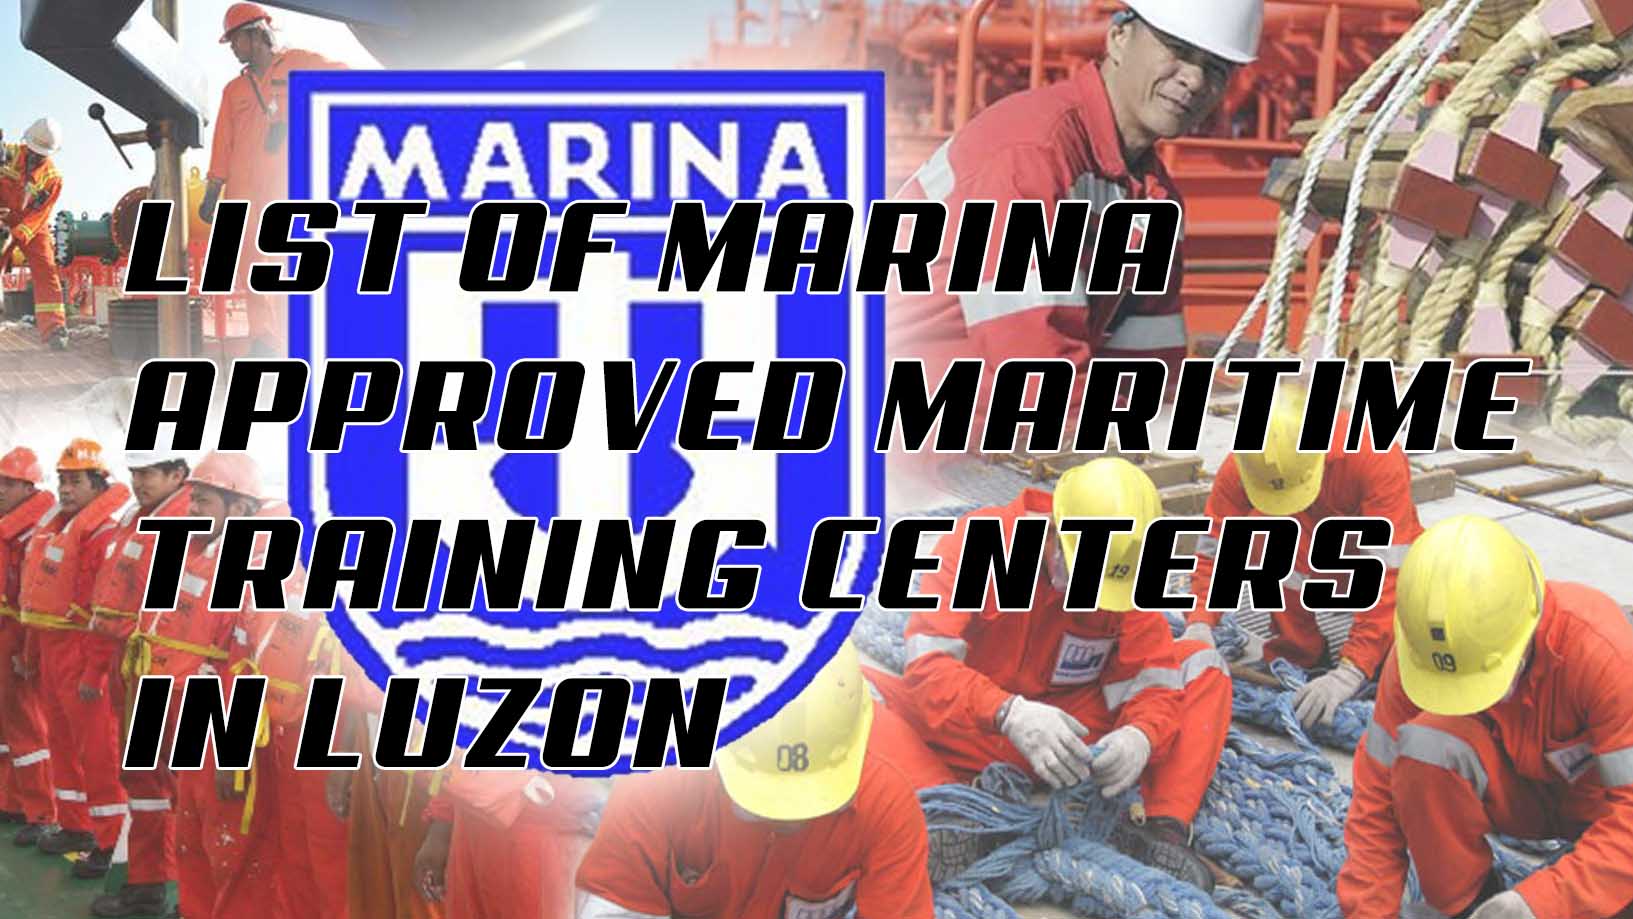 List of MARINA Approved Maritime Training Centers in Luzon (NCR Excluded)